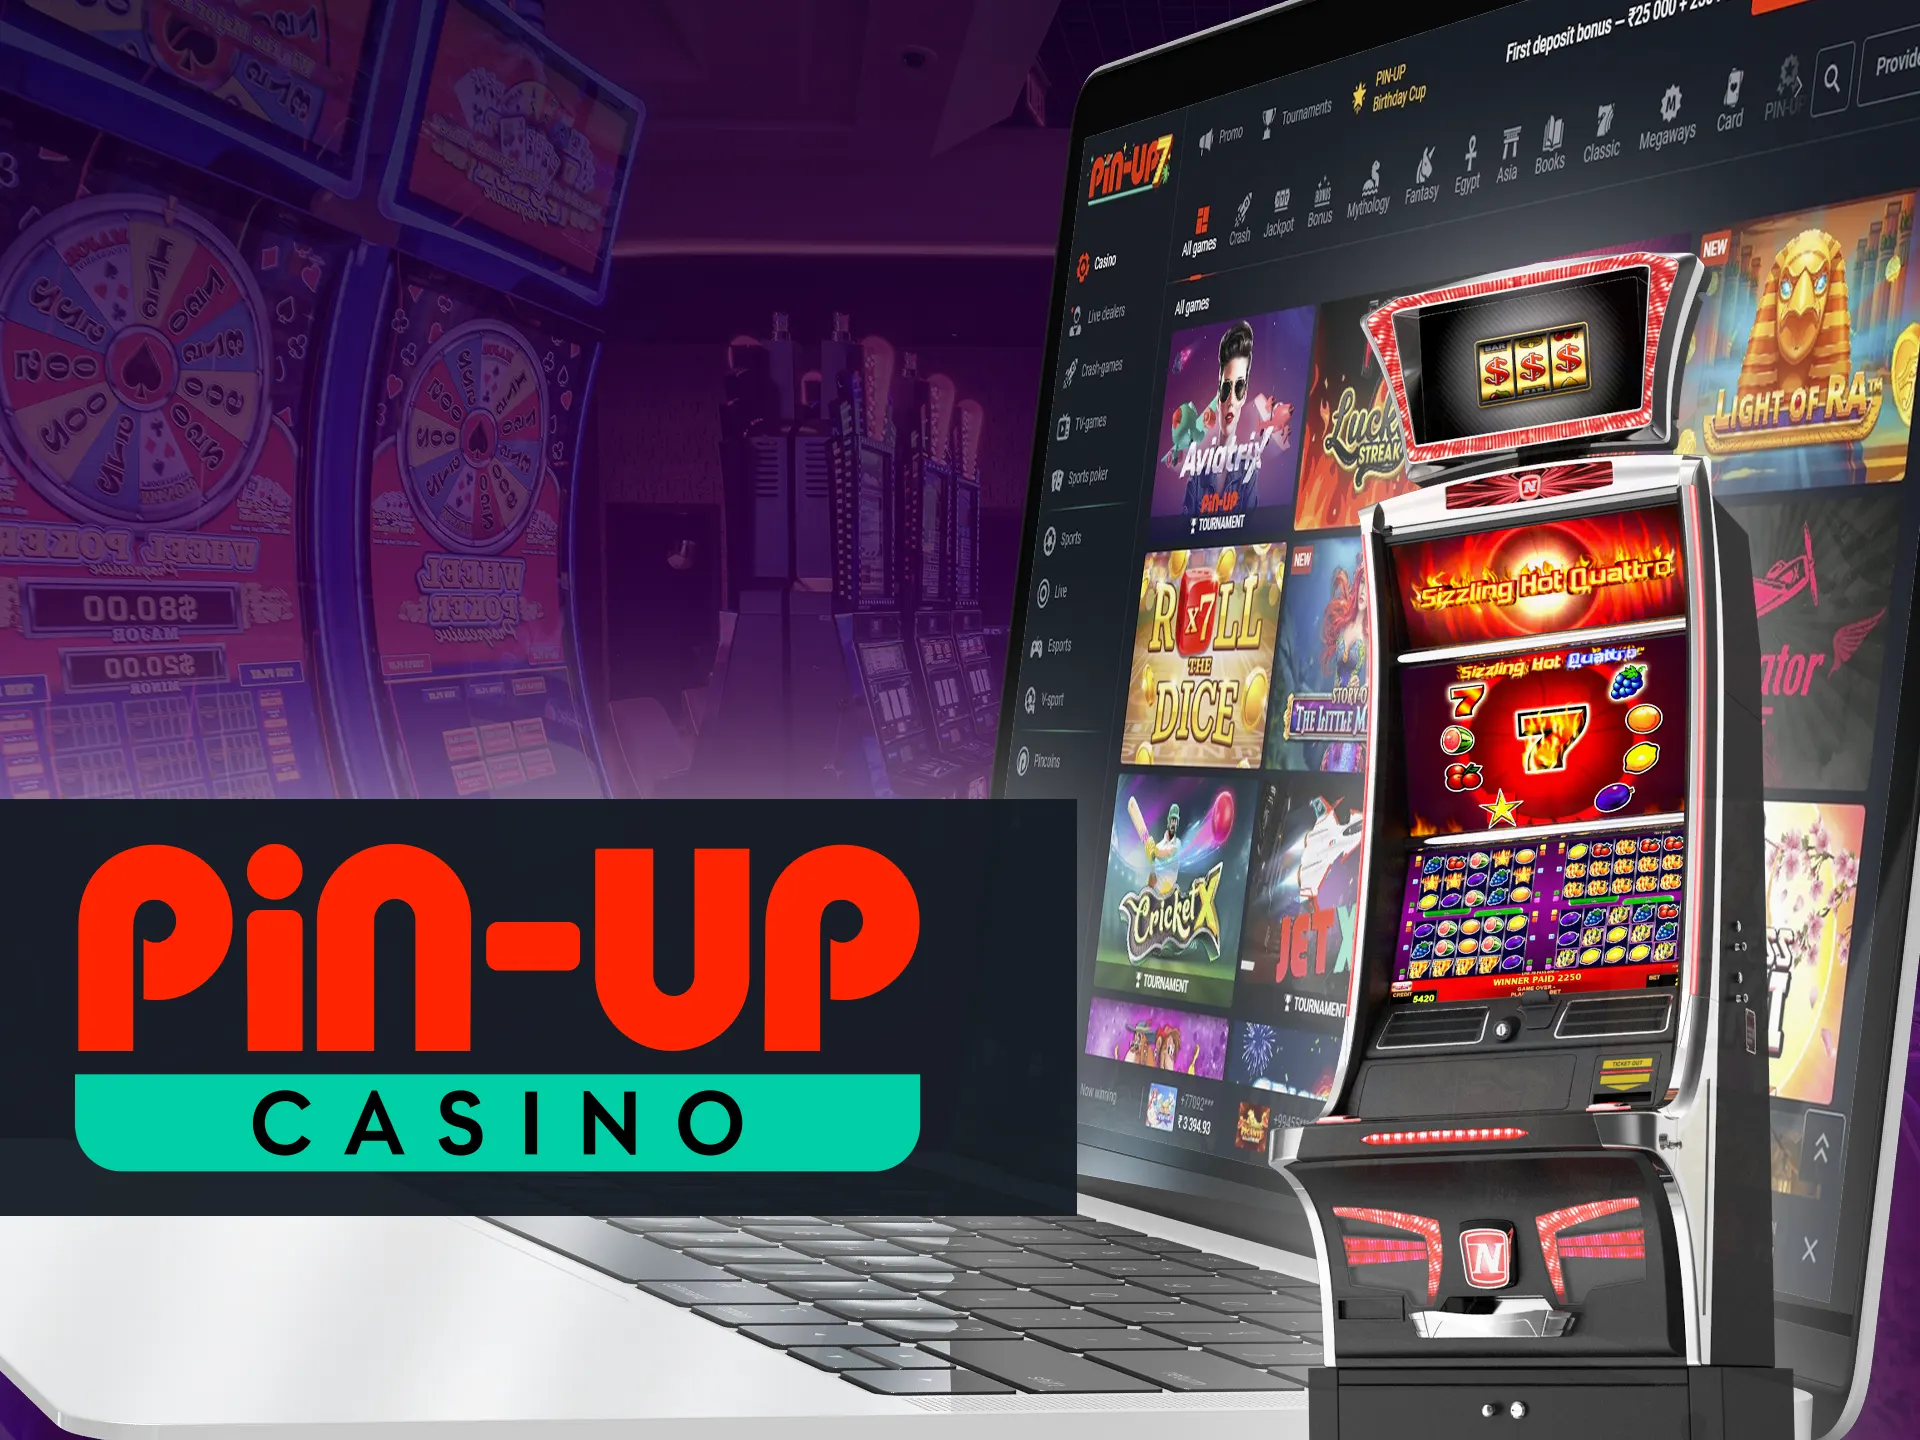 Try your luck at Pin-Up Casino slots.